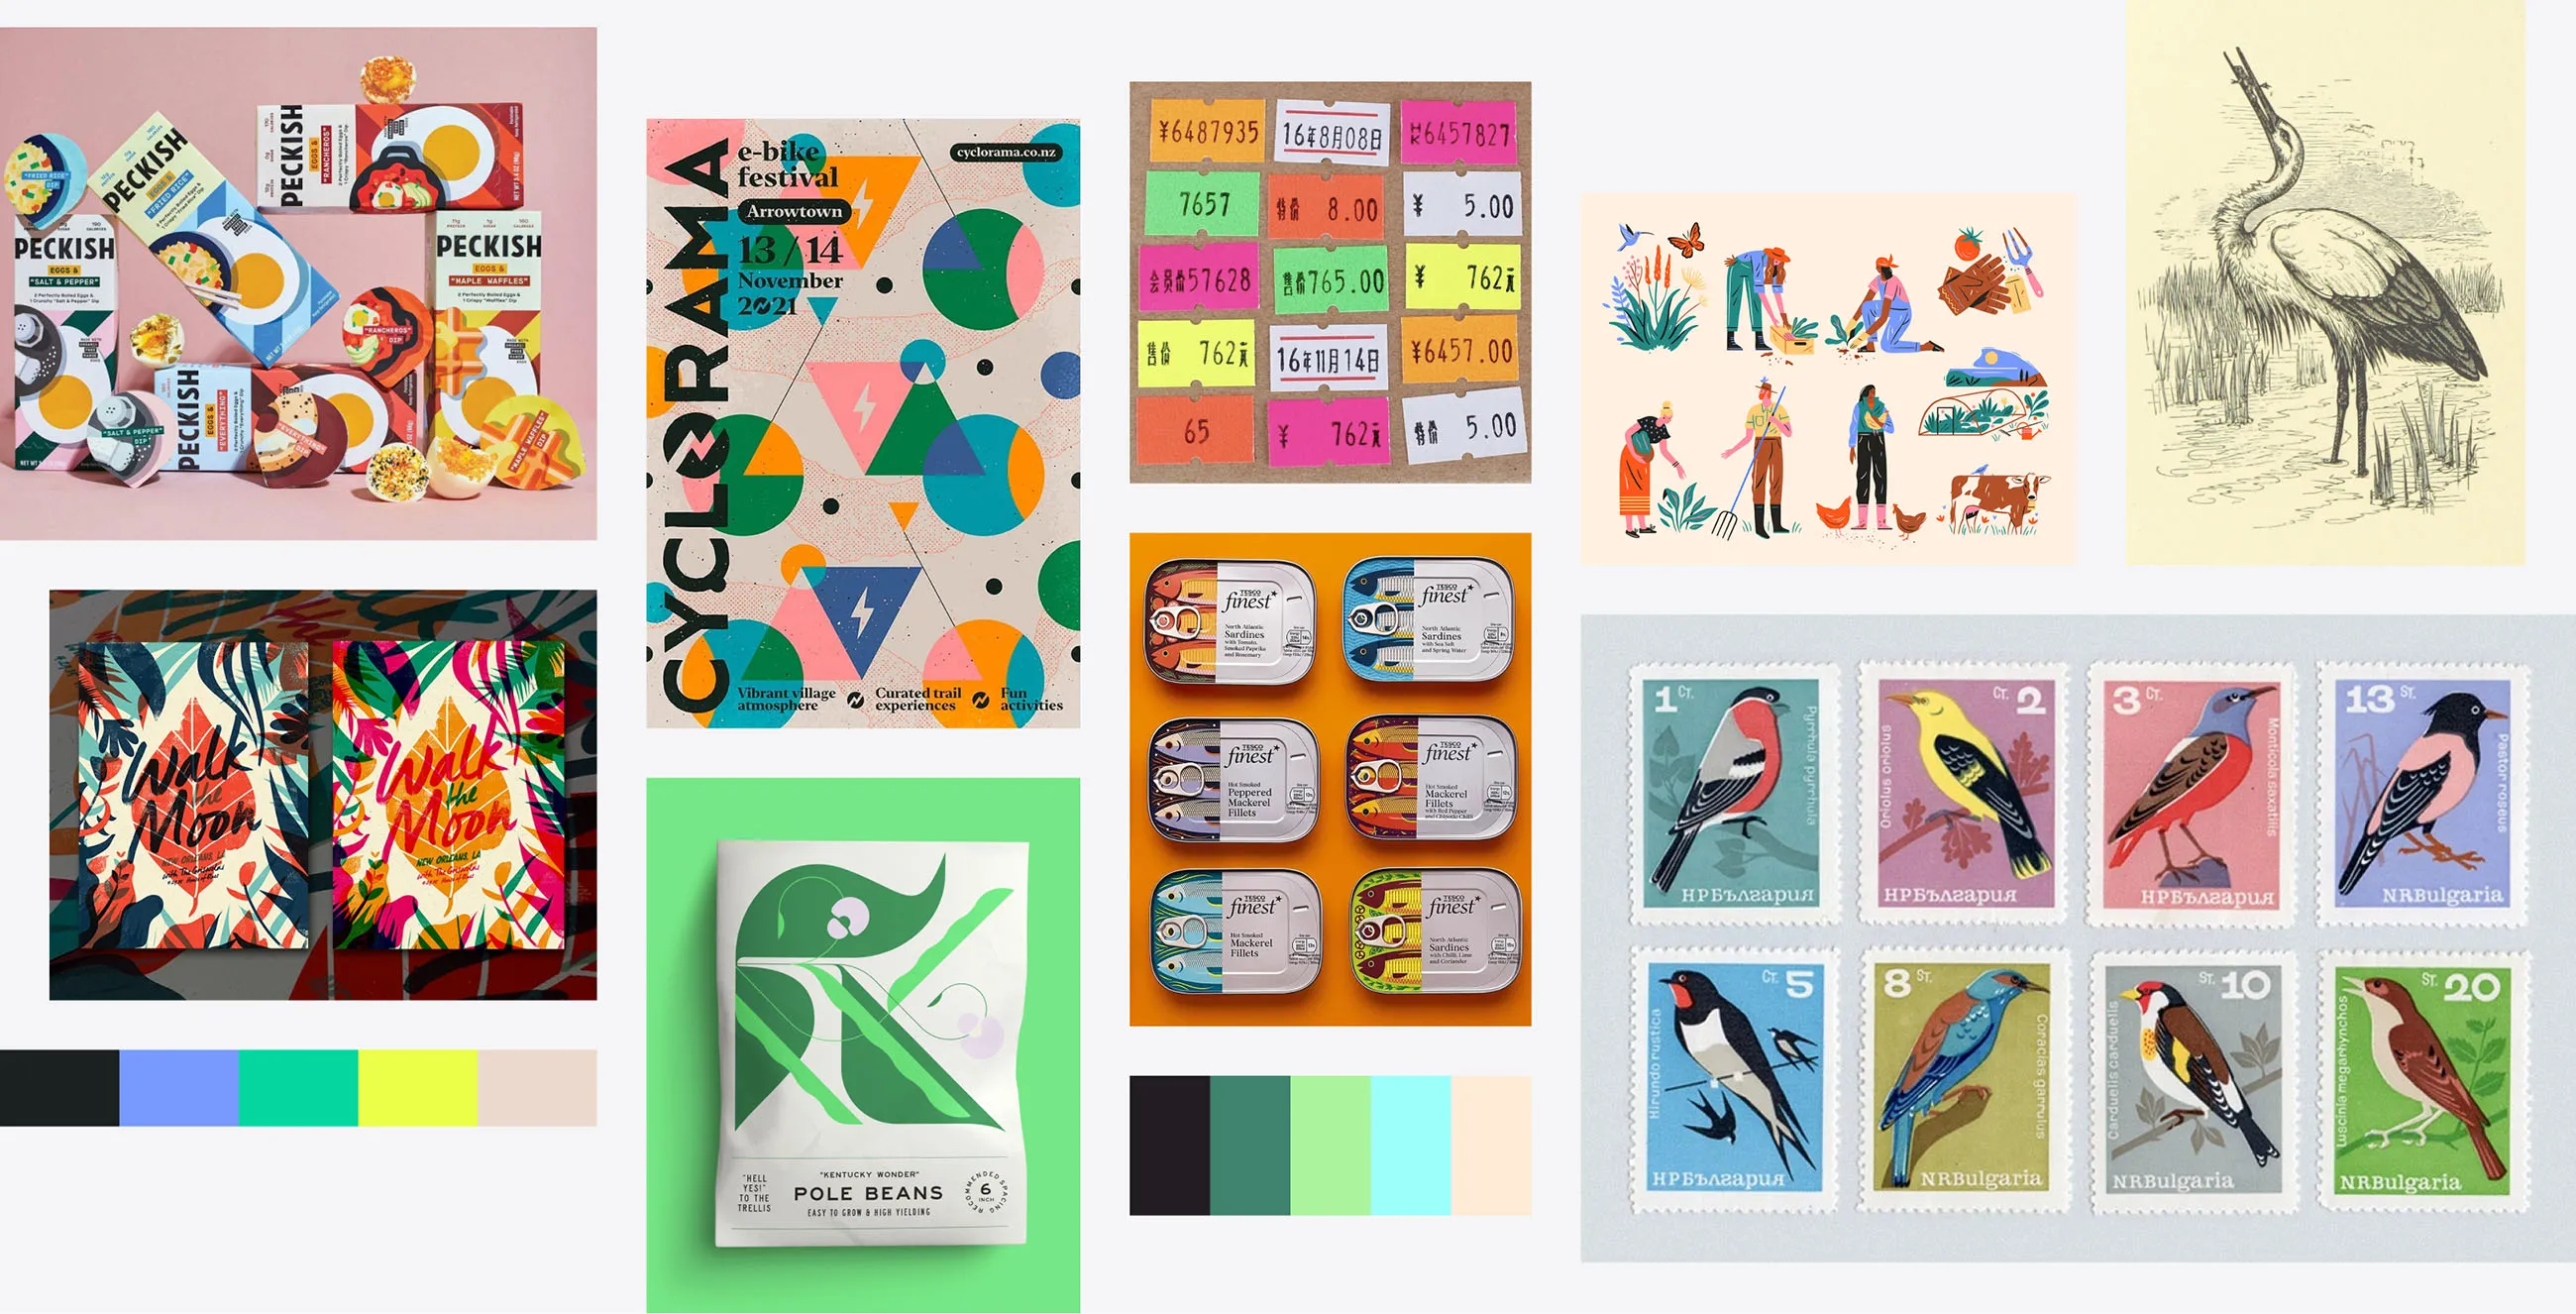 A collection of colourful image inspiration including vintage illustrations, neon price labels and food packaging